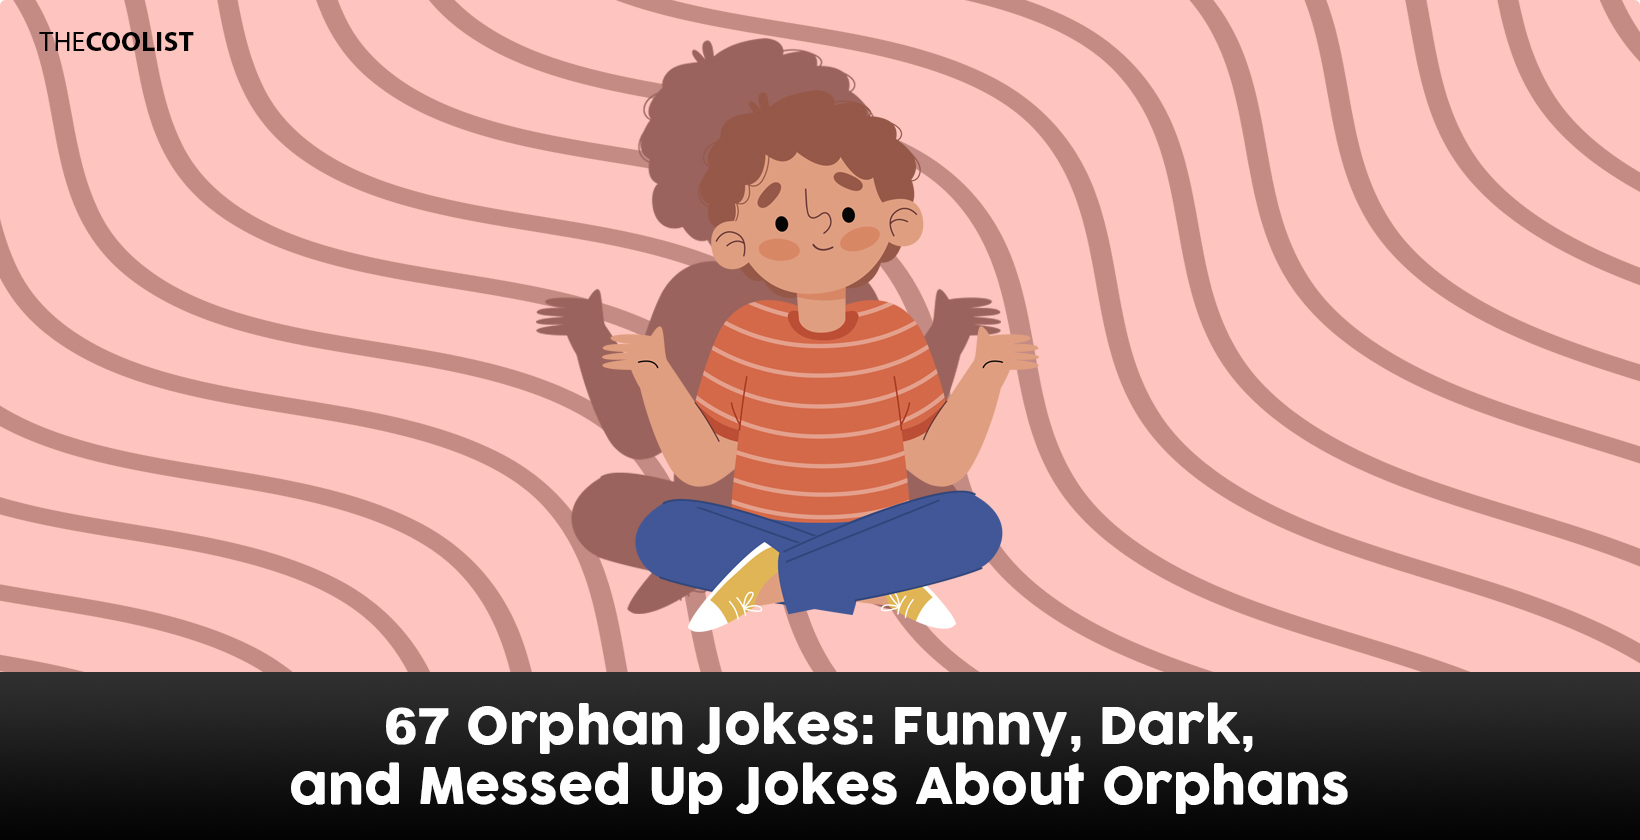 67 Orphan Jokes With No Limits (or Parents)